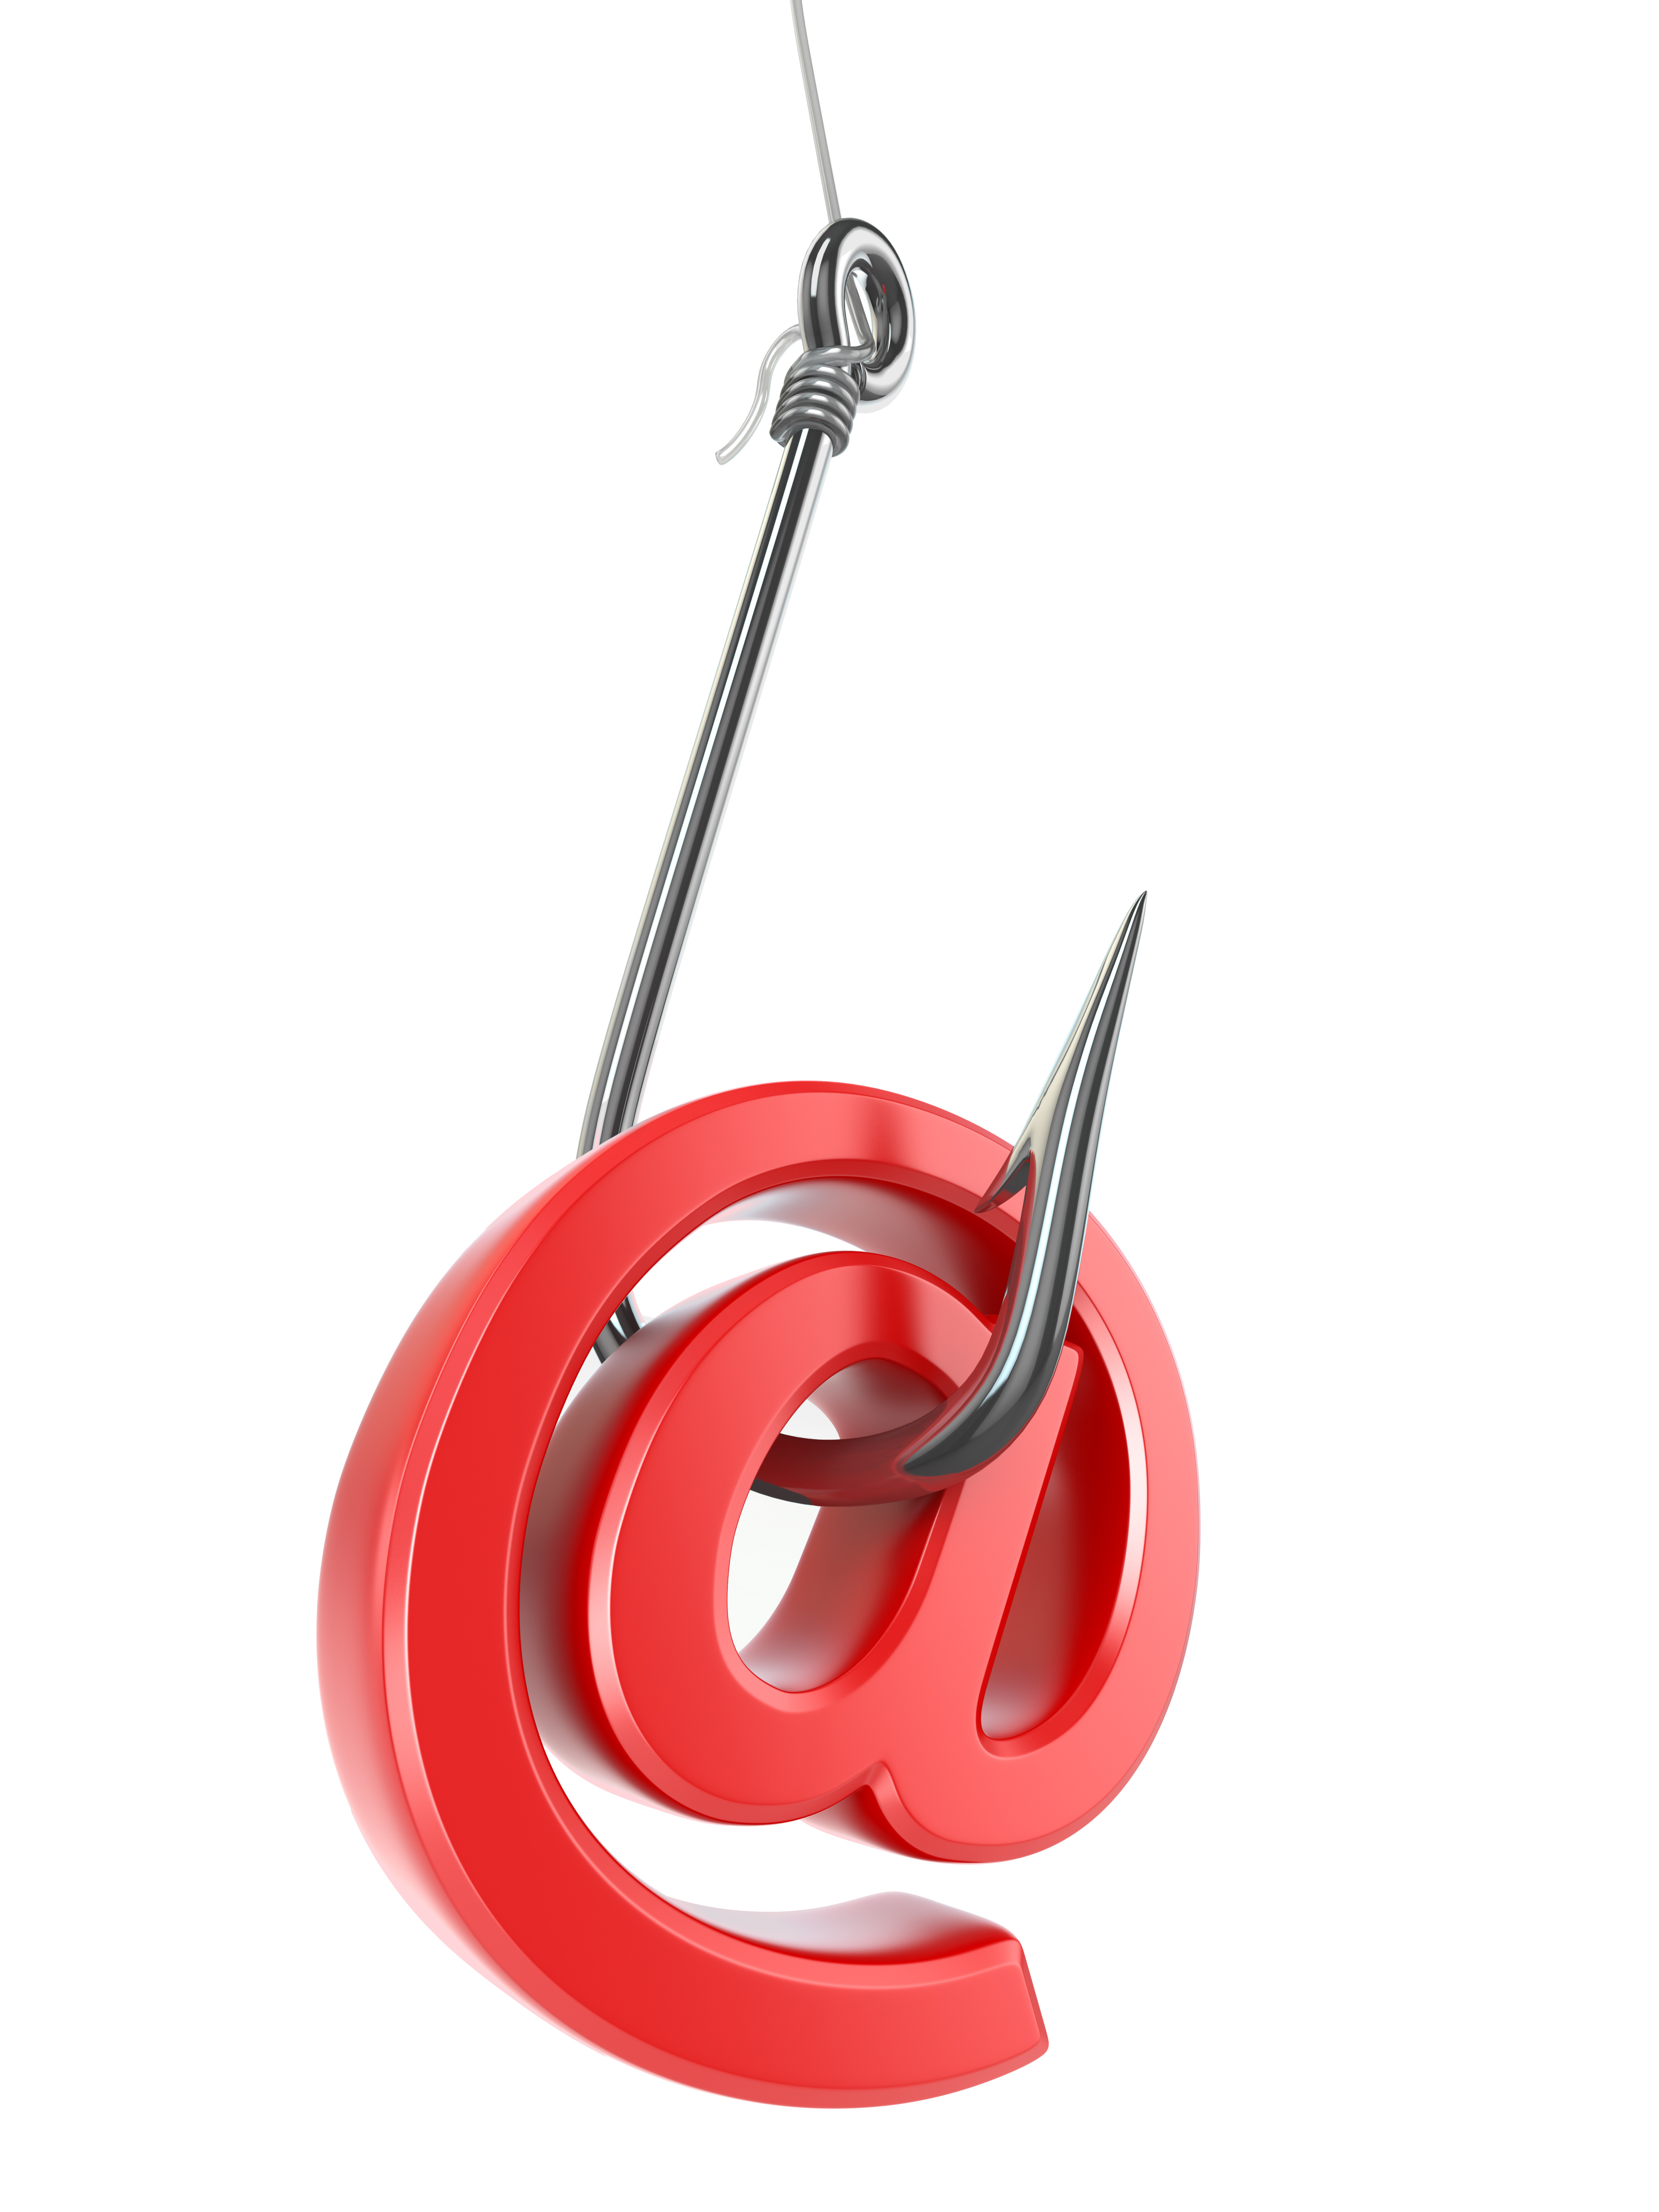 financial services phishing